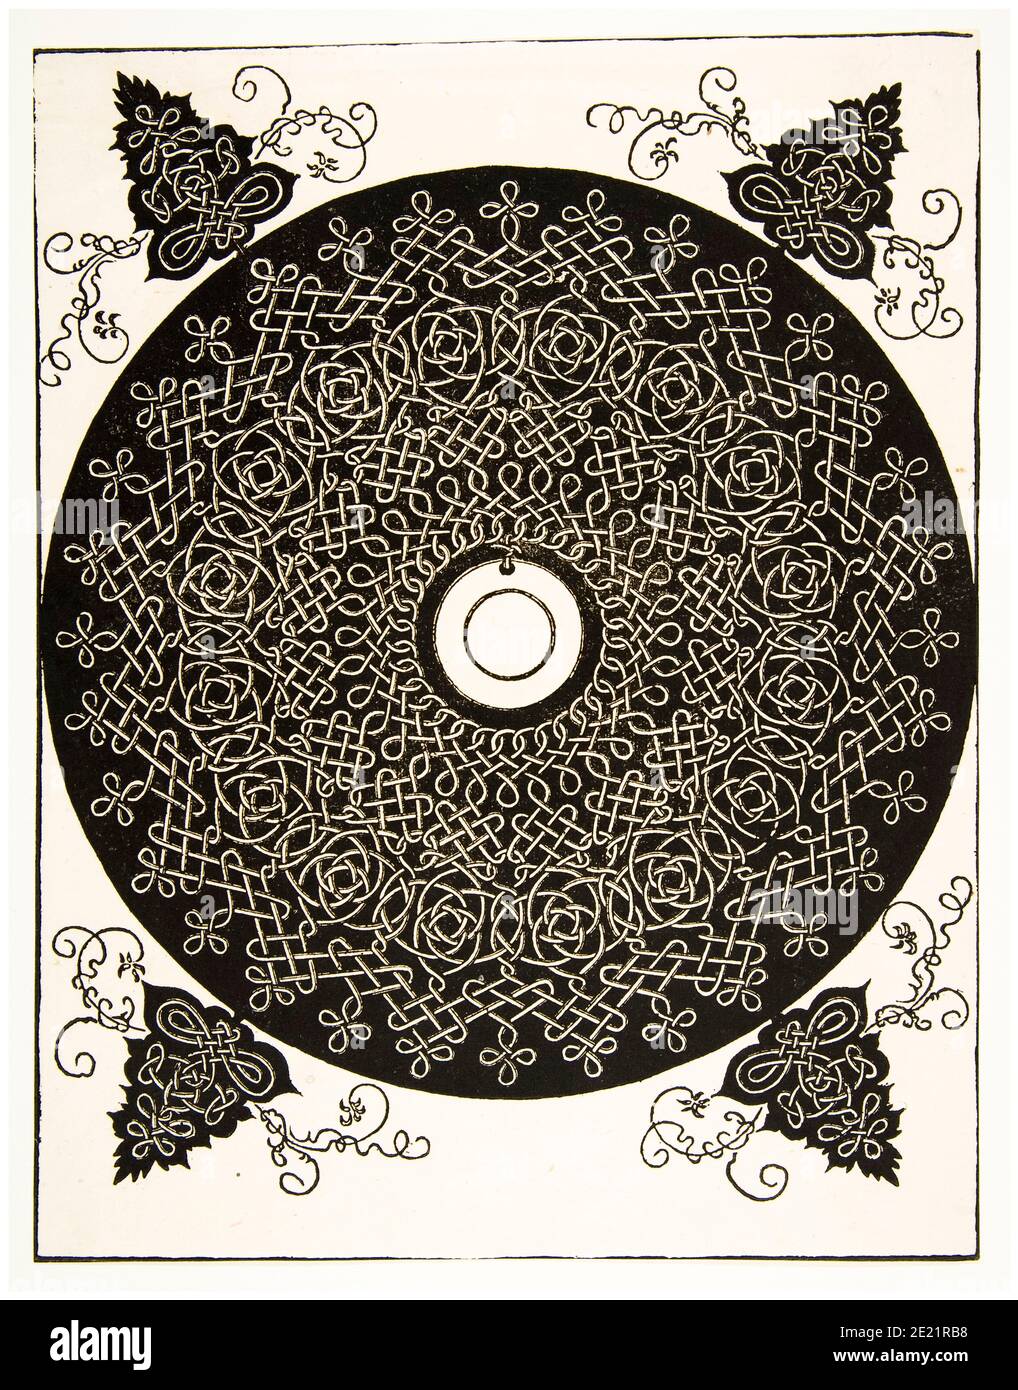 The Fourth Knot, woodcut print by Albrecht Dürer, before 1521 Stock Photo